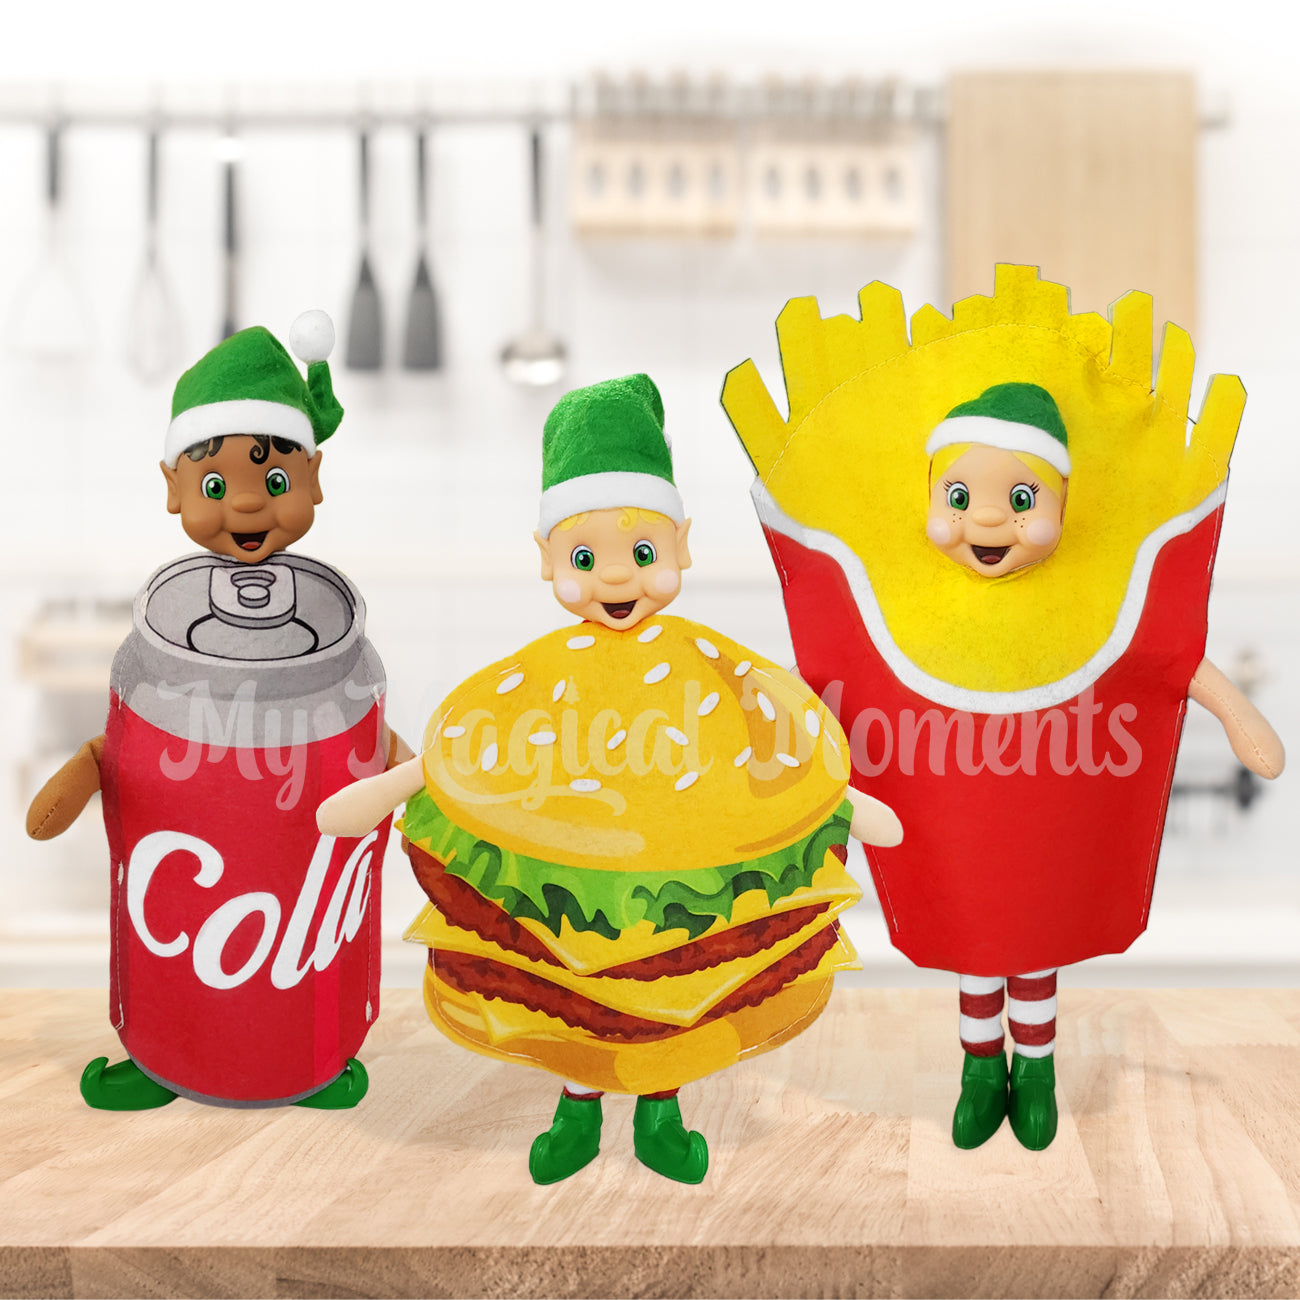 Elf food costumes trio, burger outfit, cola outfit and fries outfit worn by My elf friends